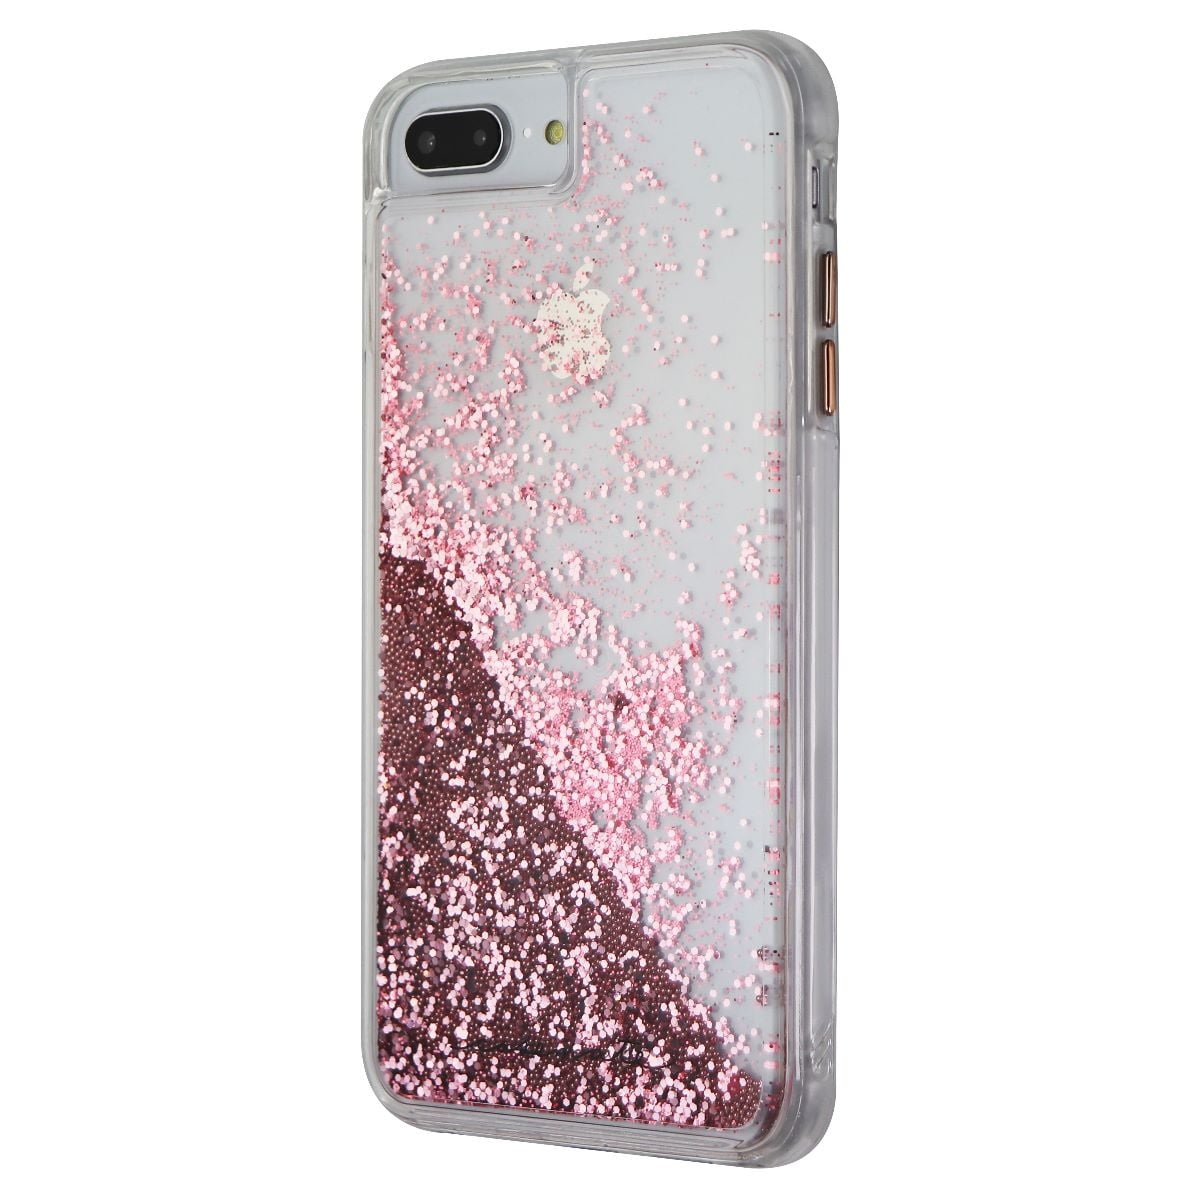 CaseMate Waterfall Liquid Glitter Case for iPhone 8 Plus and 7 Plus